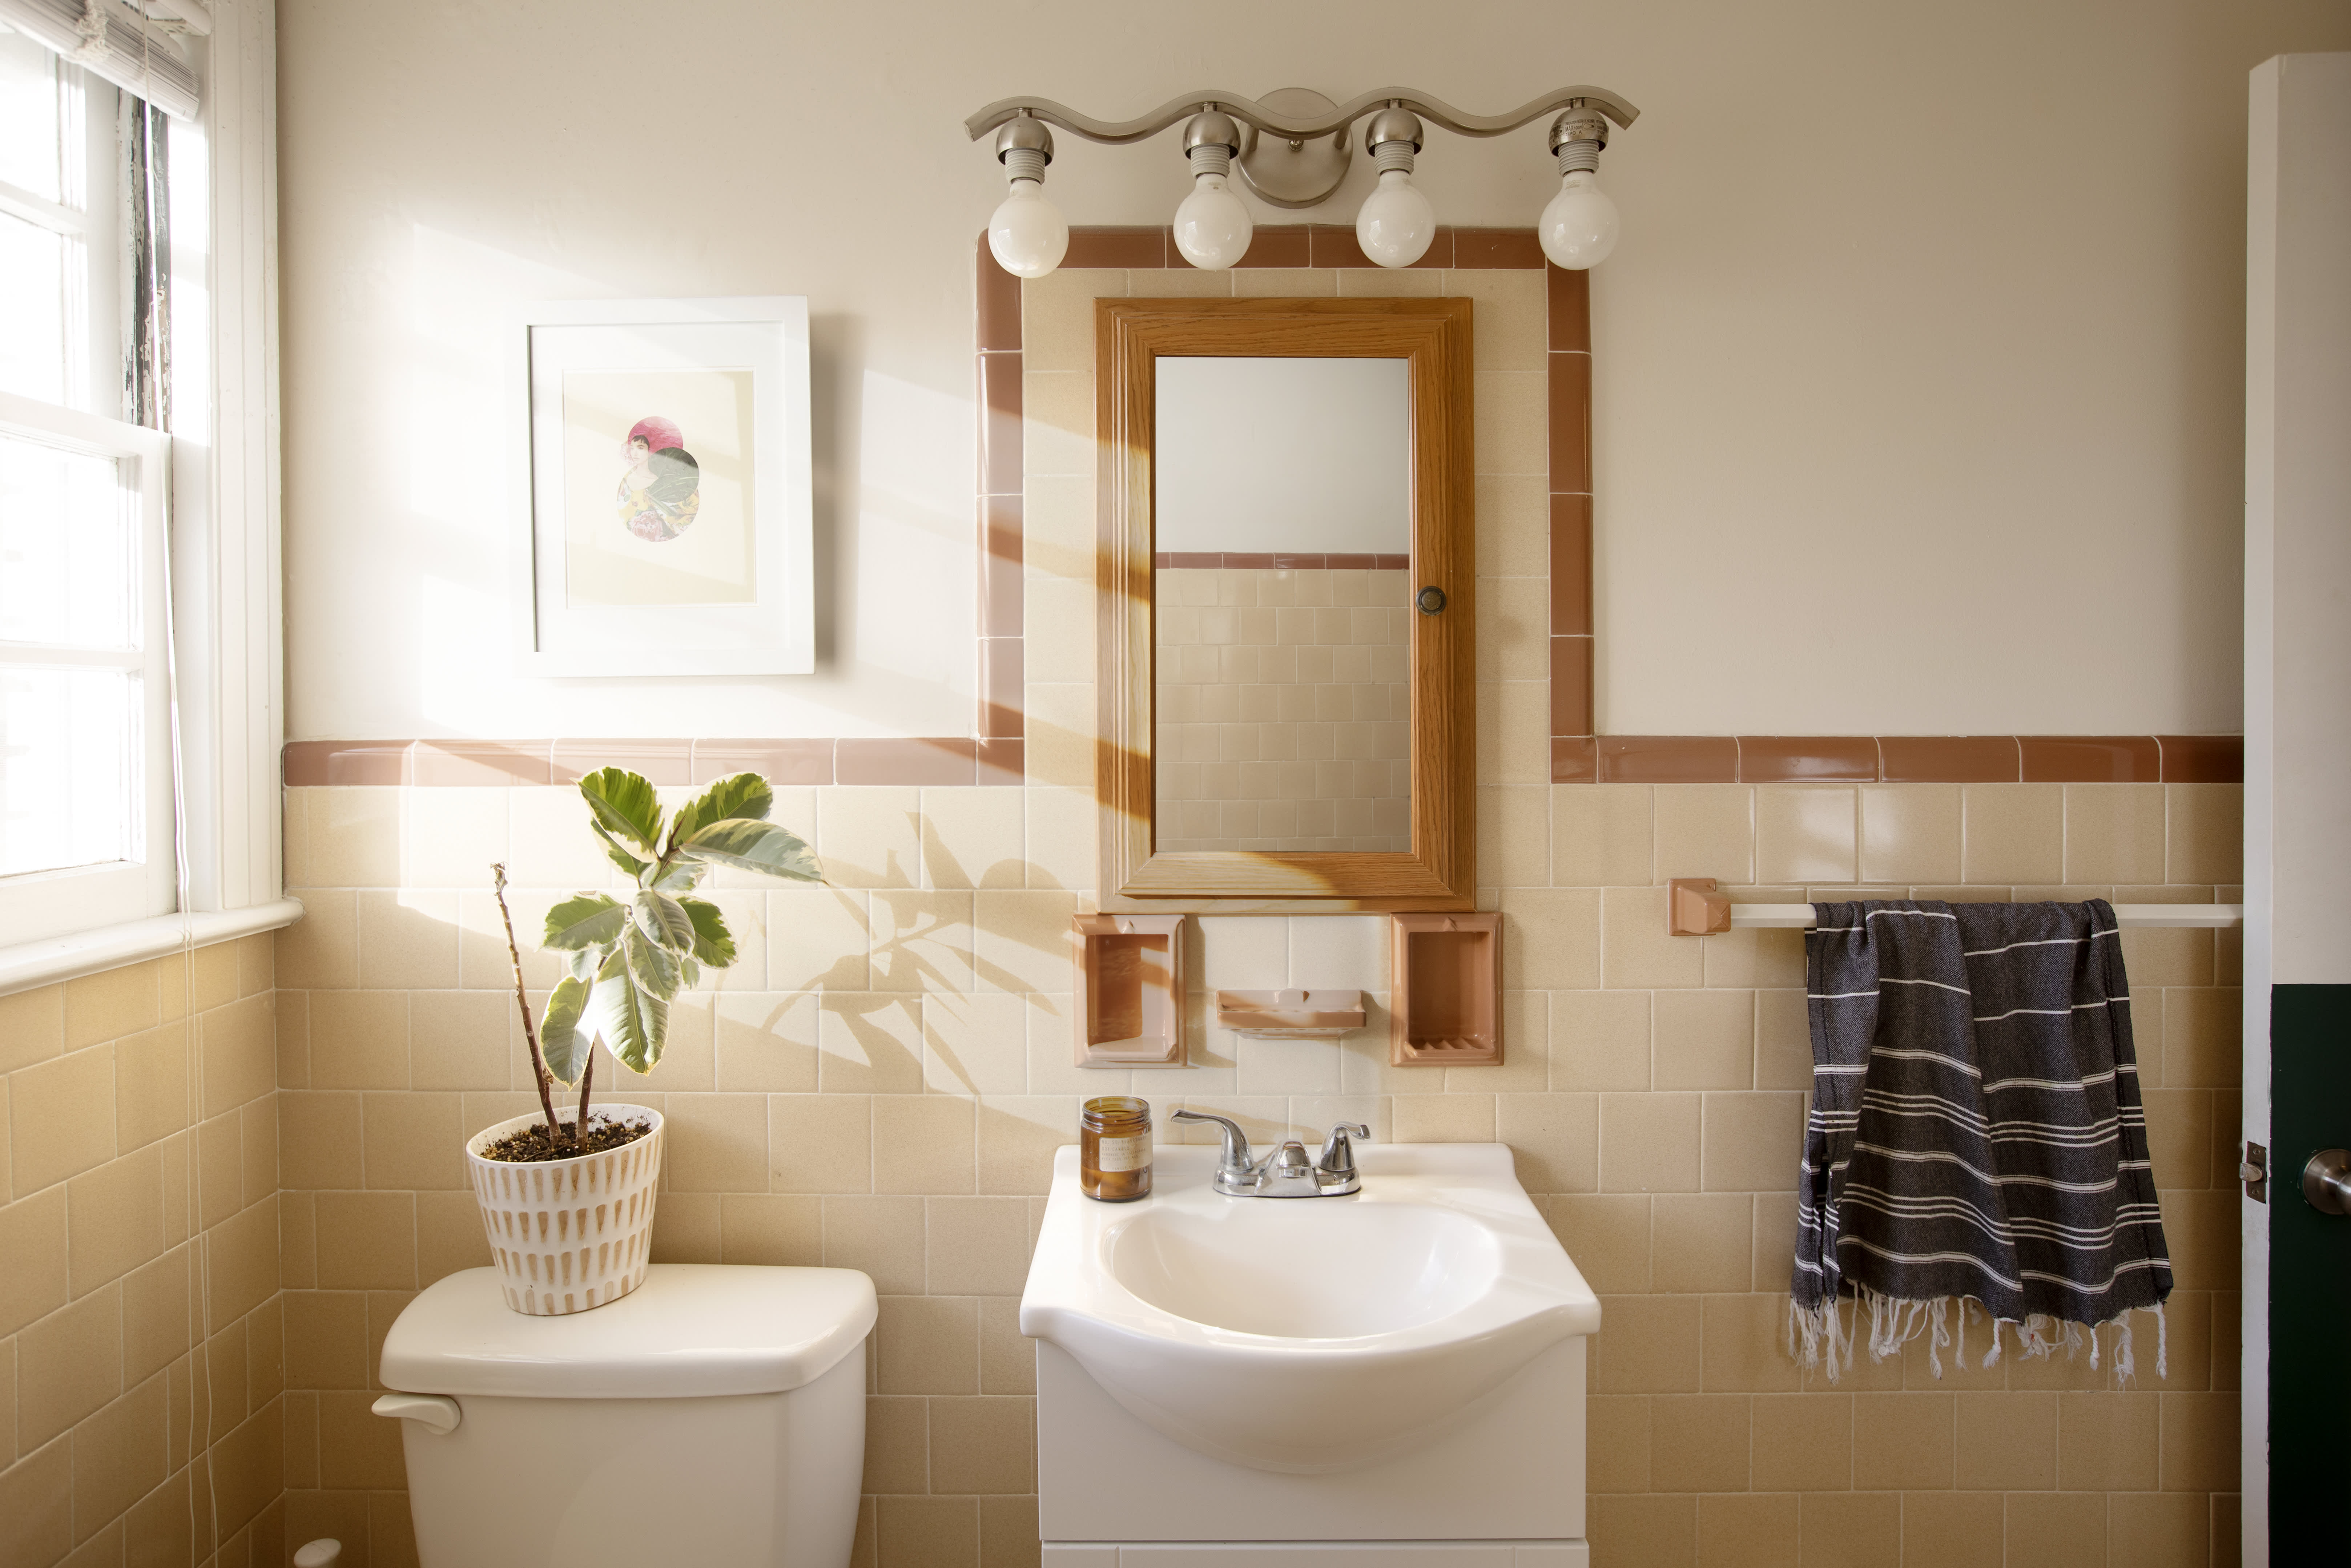 11 Things Everyone Should Have Somewhere in Their Bathroom